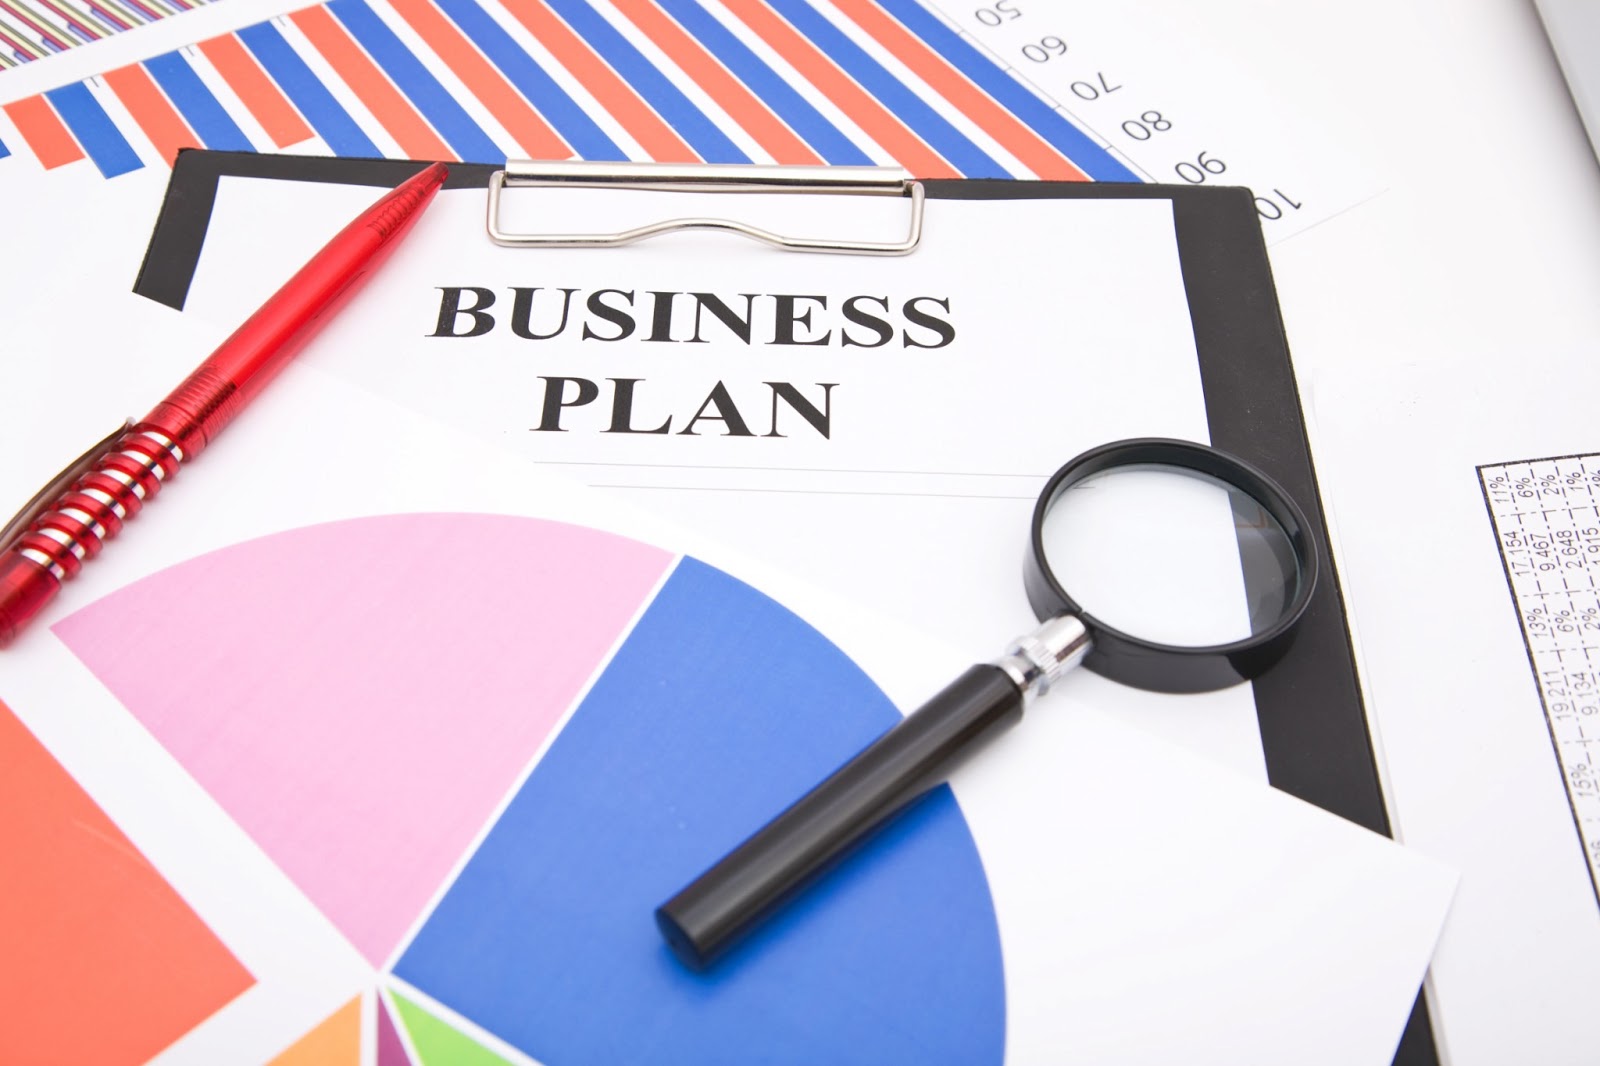 what does the business plan means